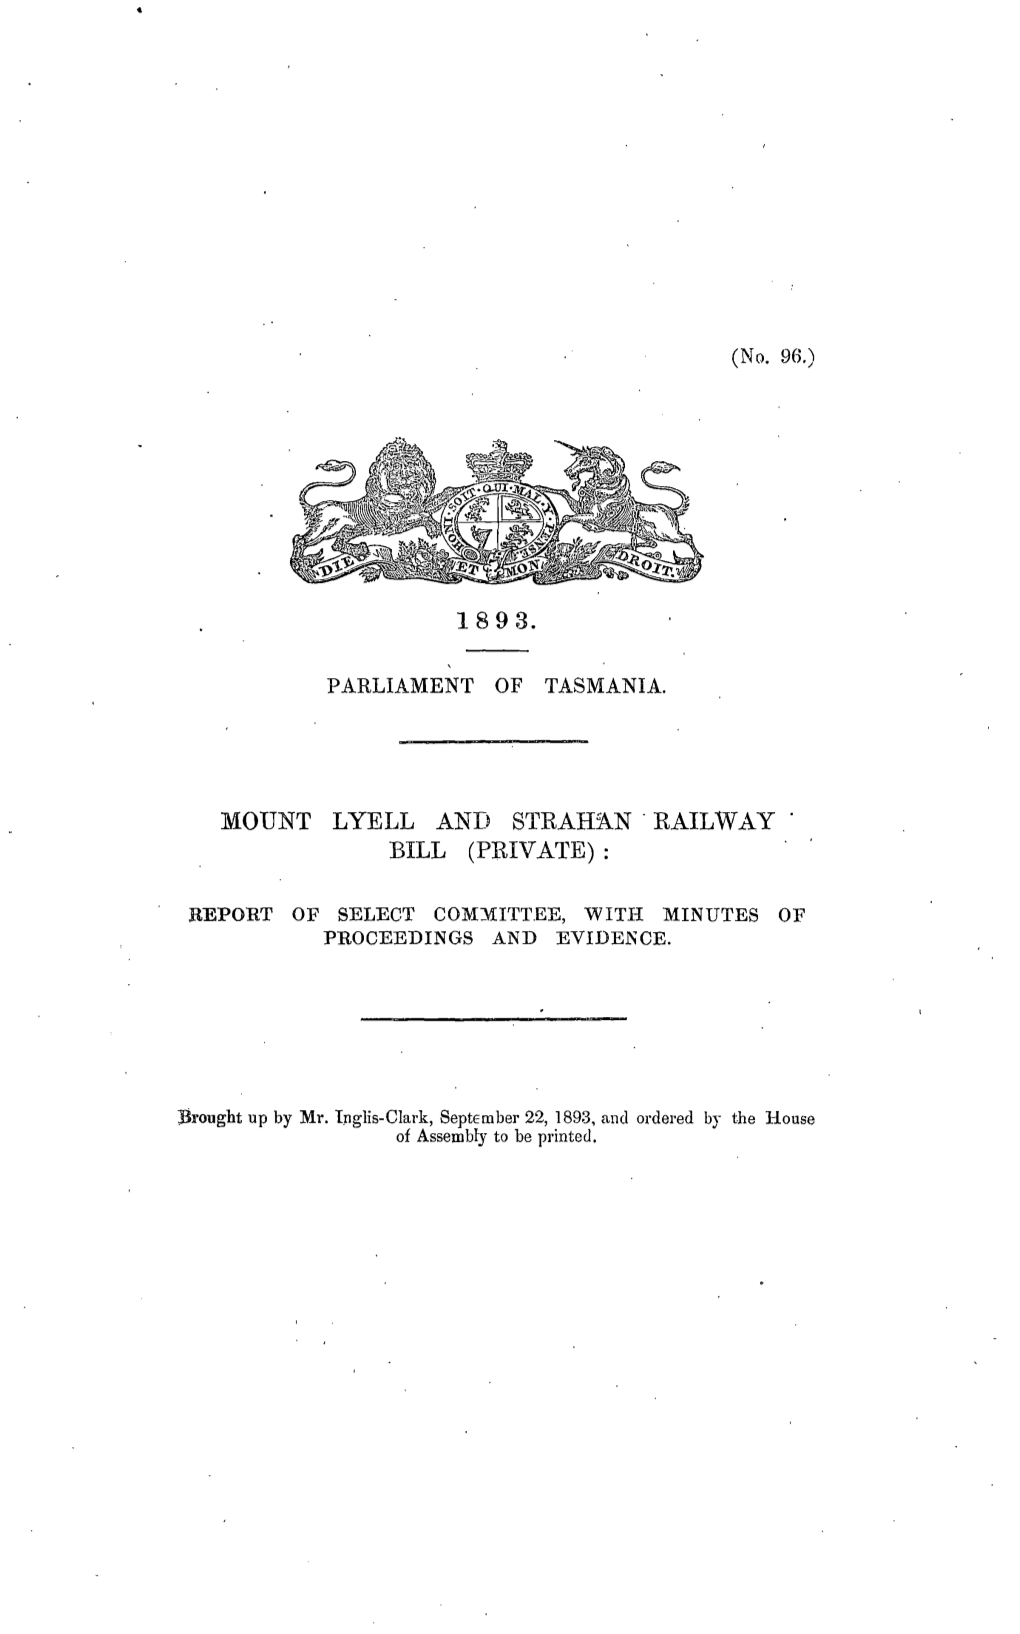 Mount Lyell and Strahan Railway Bill (Private)